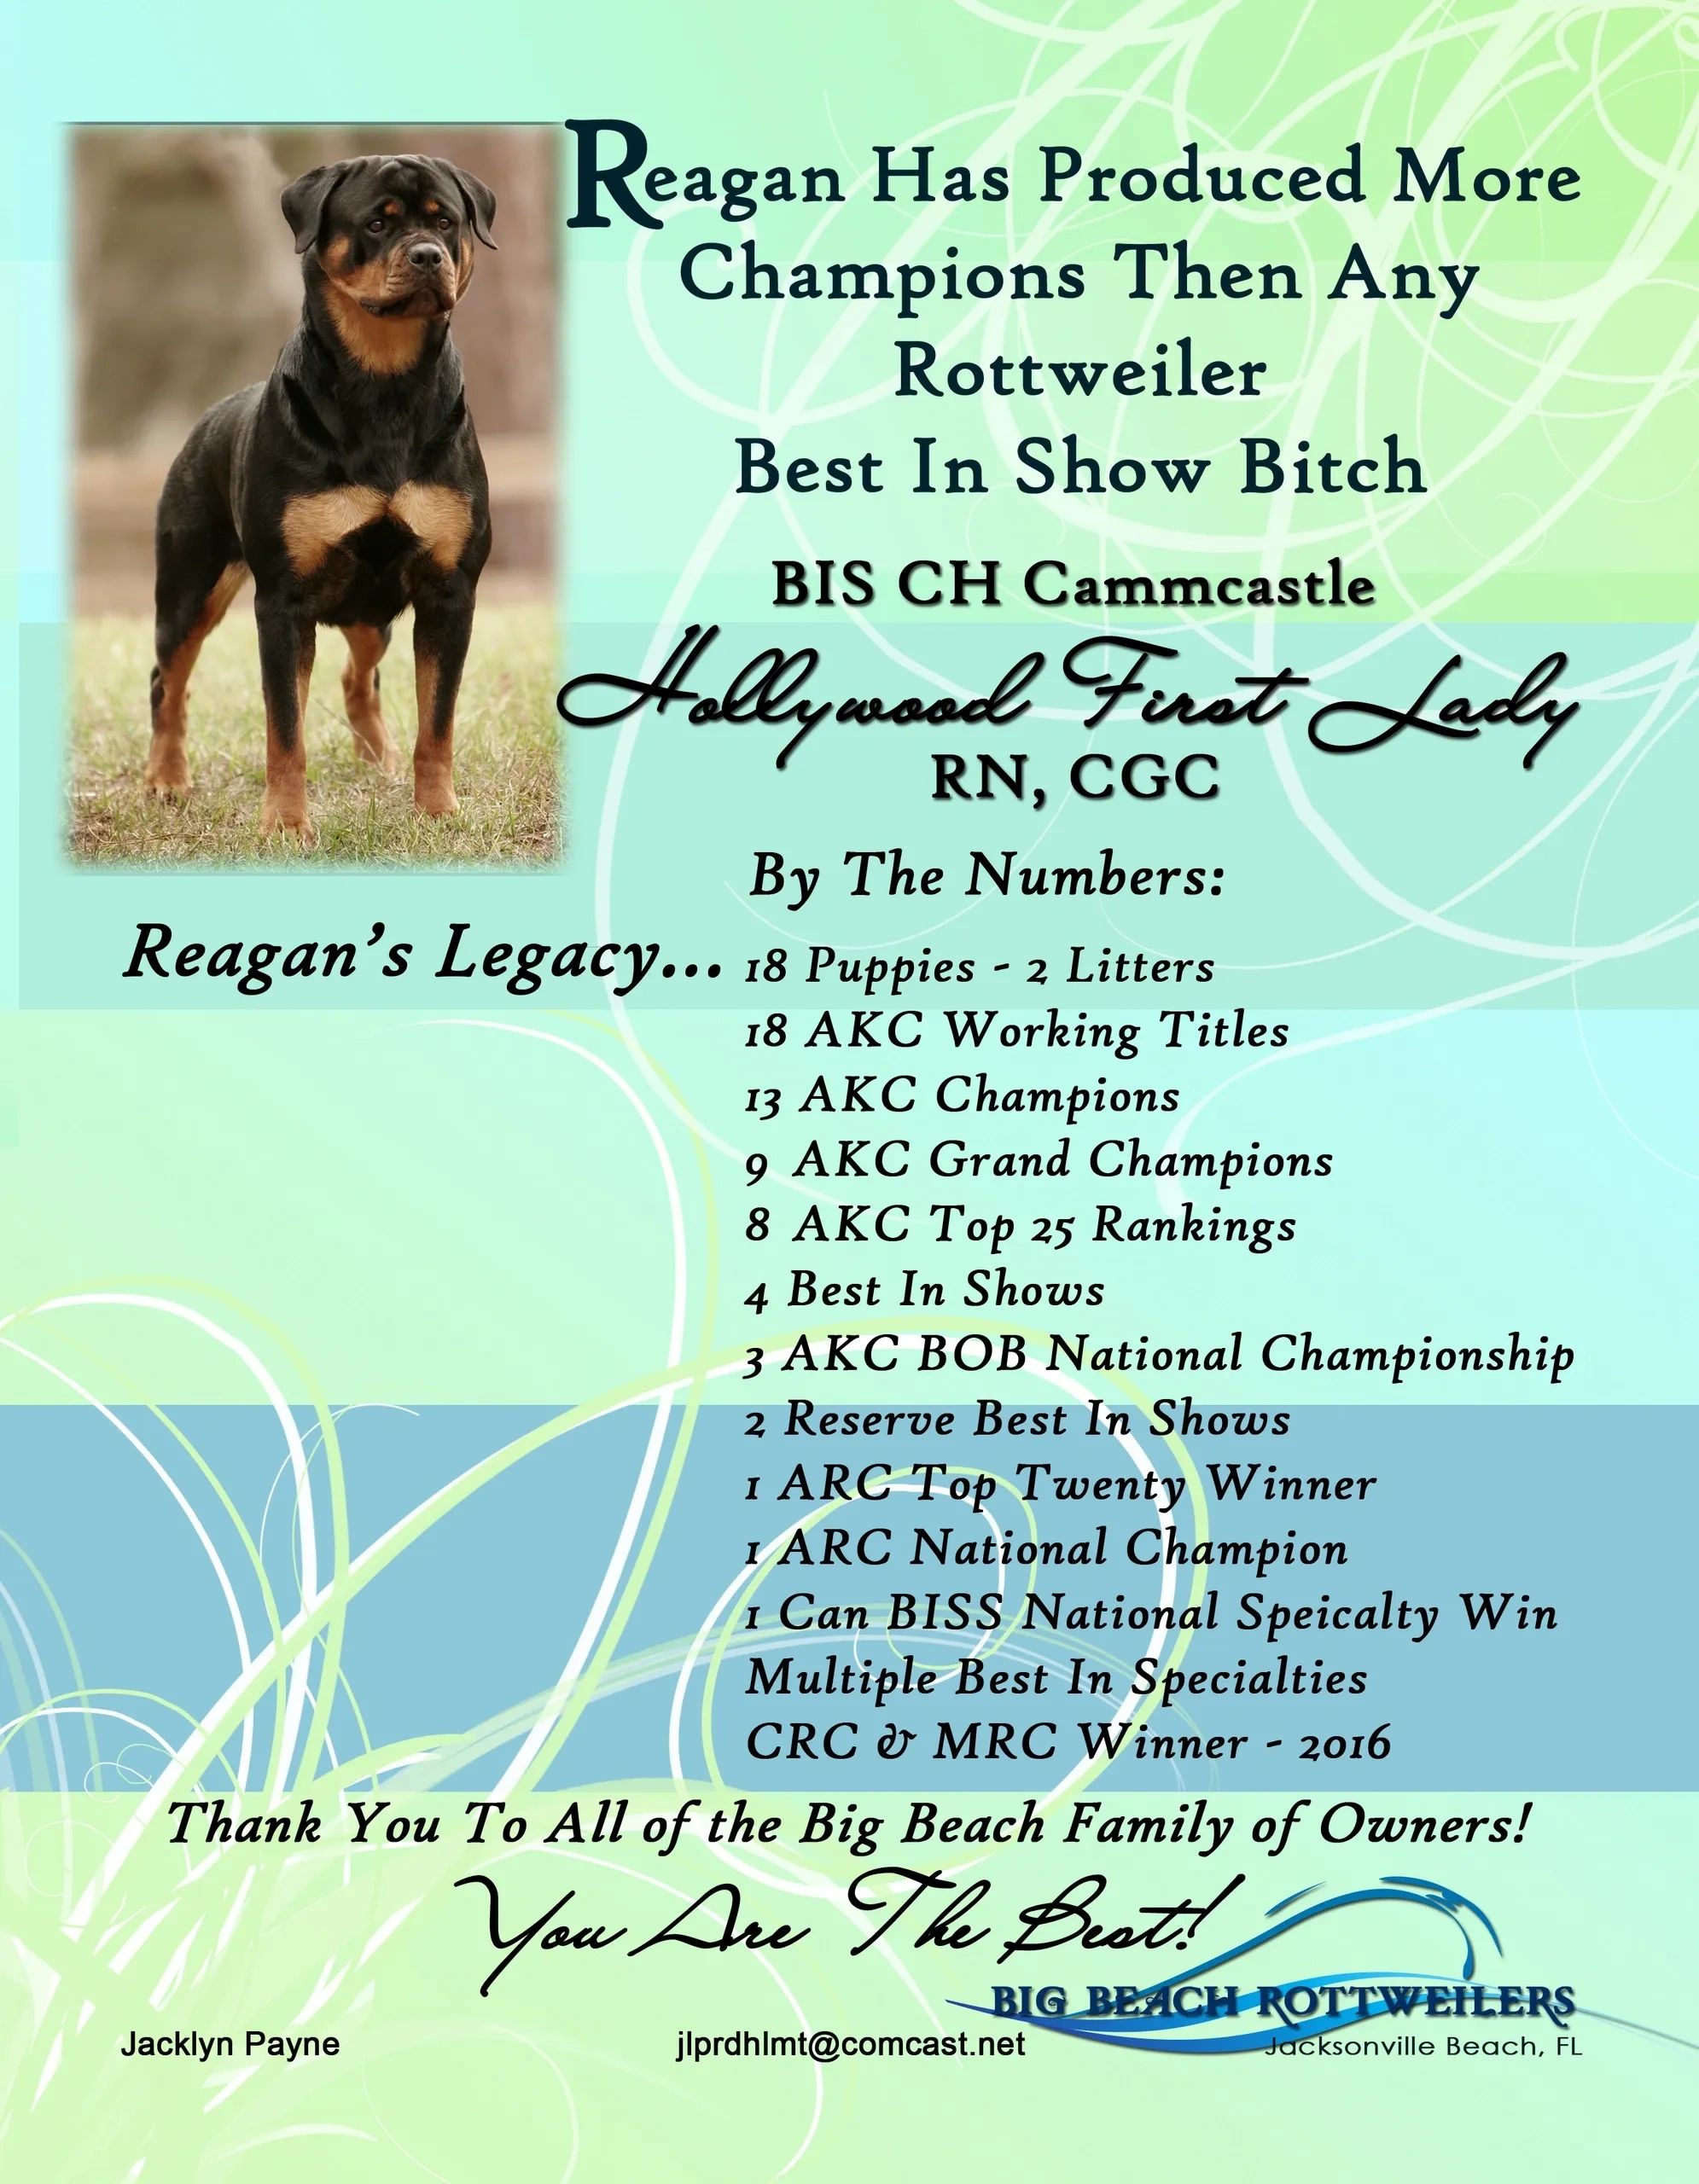 Reagan BISS CH Camcastle Hollywood First Lady RN CGC Legacy Reagan Has Produced Mord Champions Then 